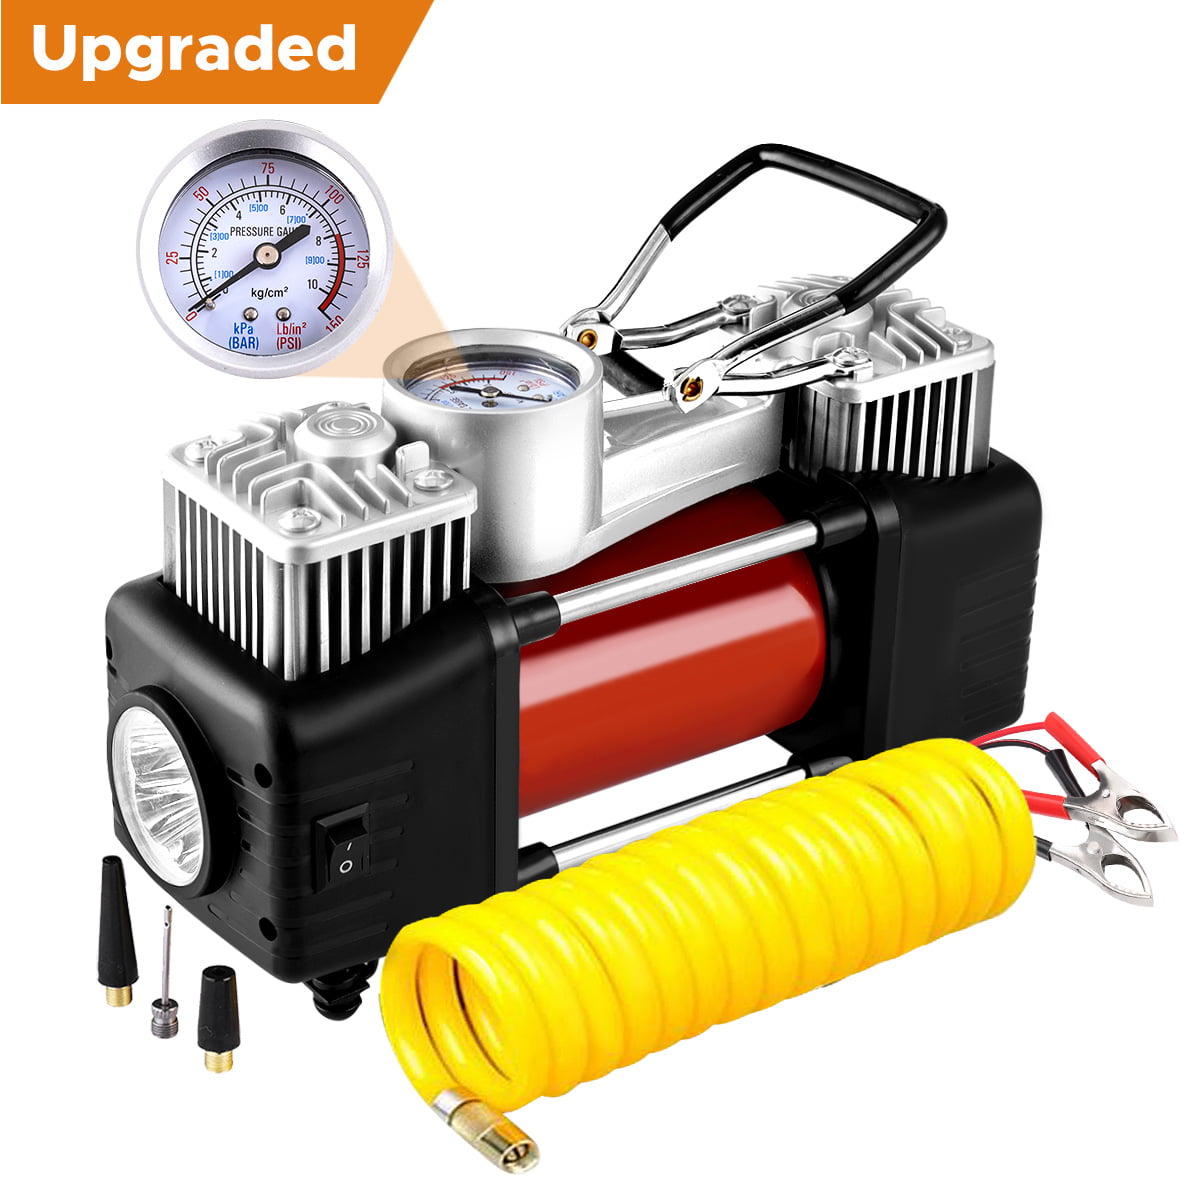 Top 5 Garage Air Compressors For Efficiently Inflating Car Tires Brighligh